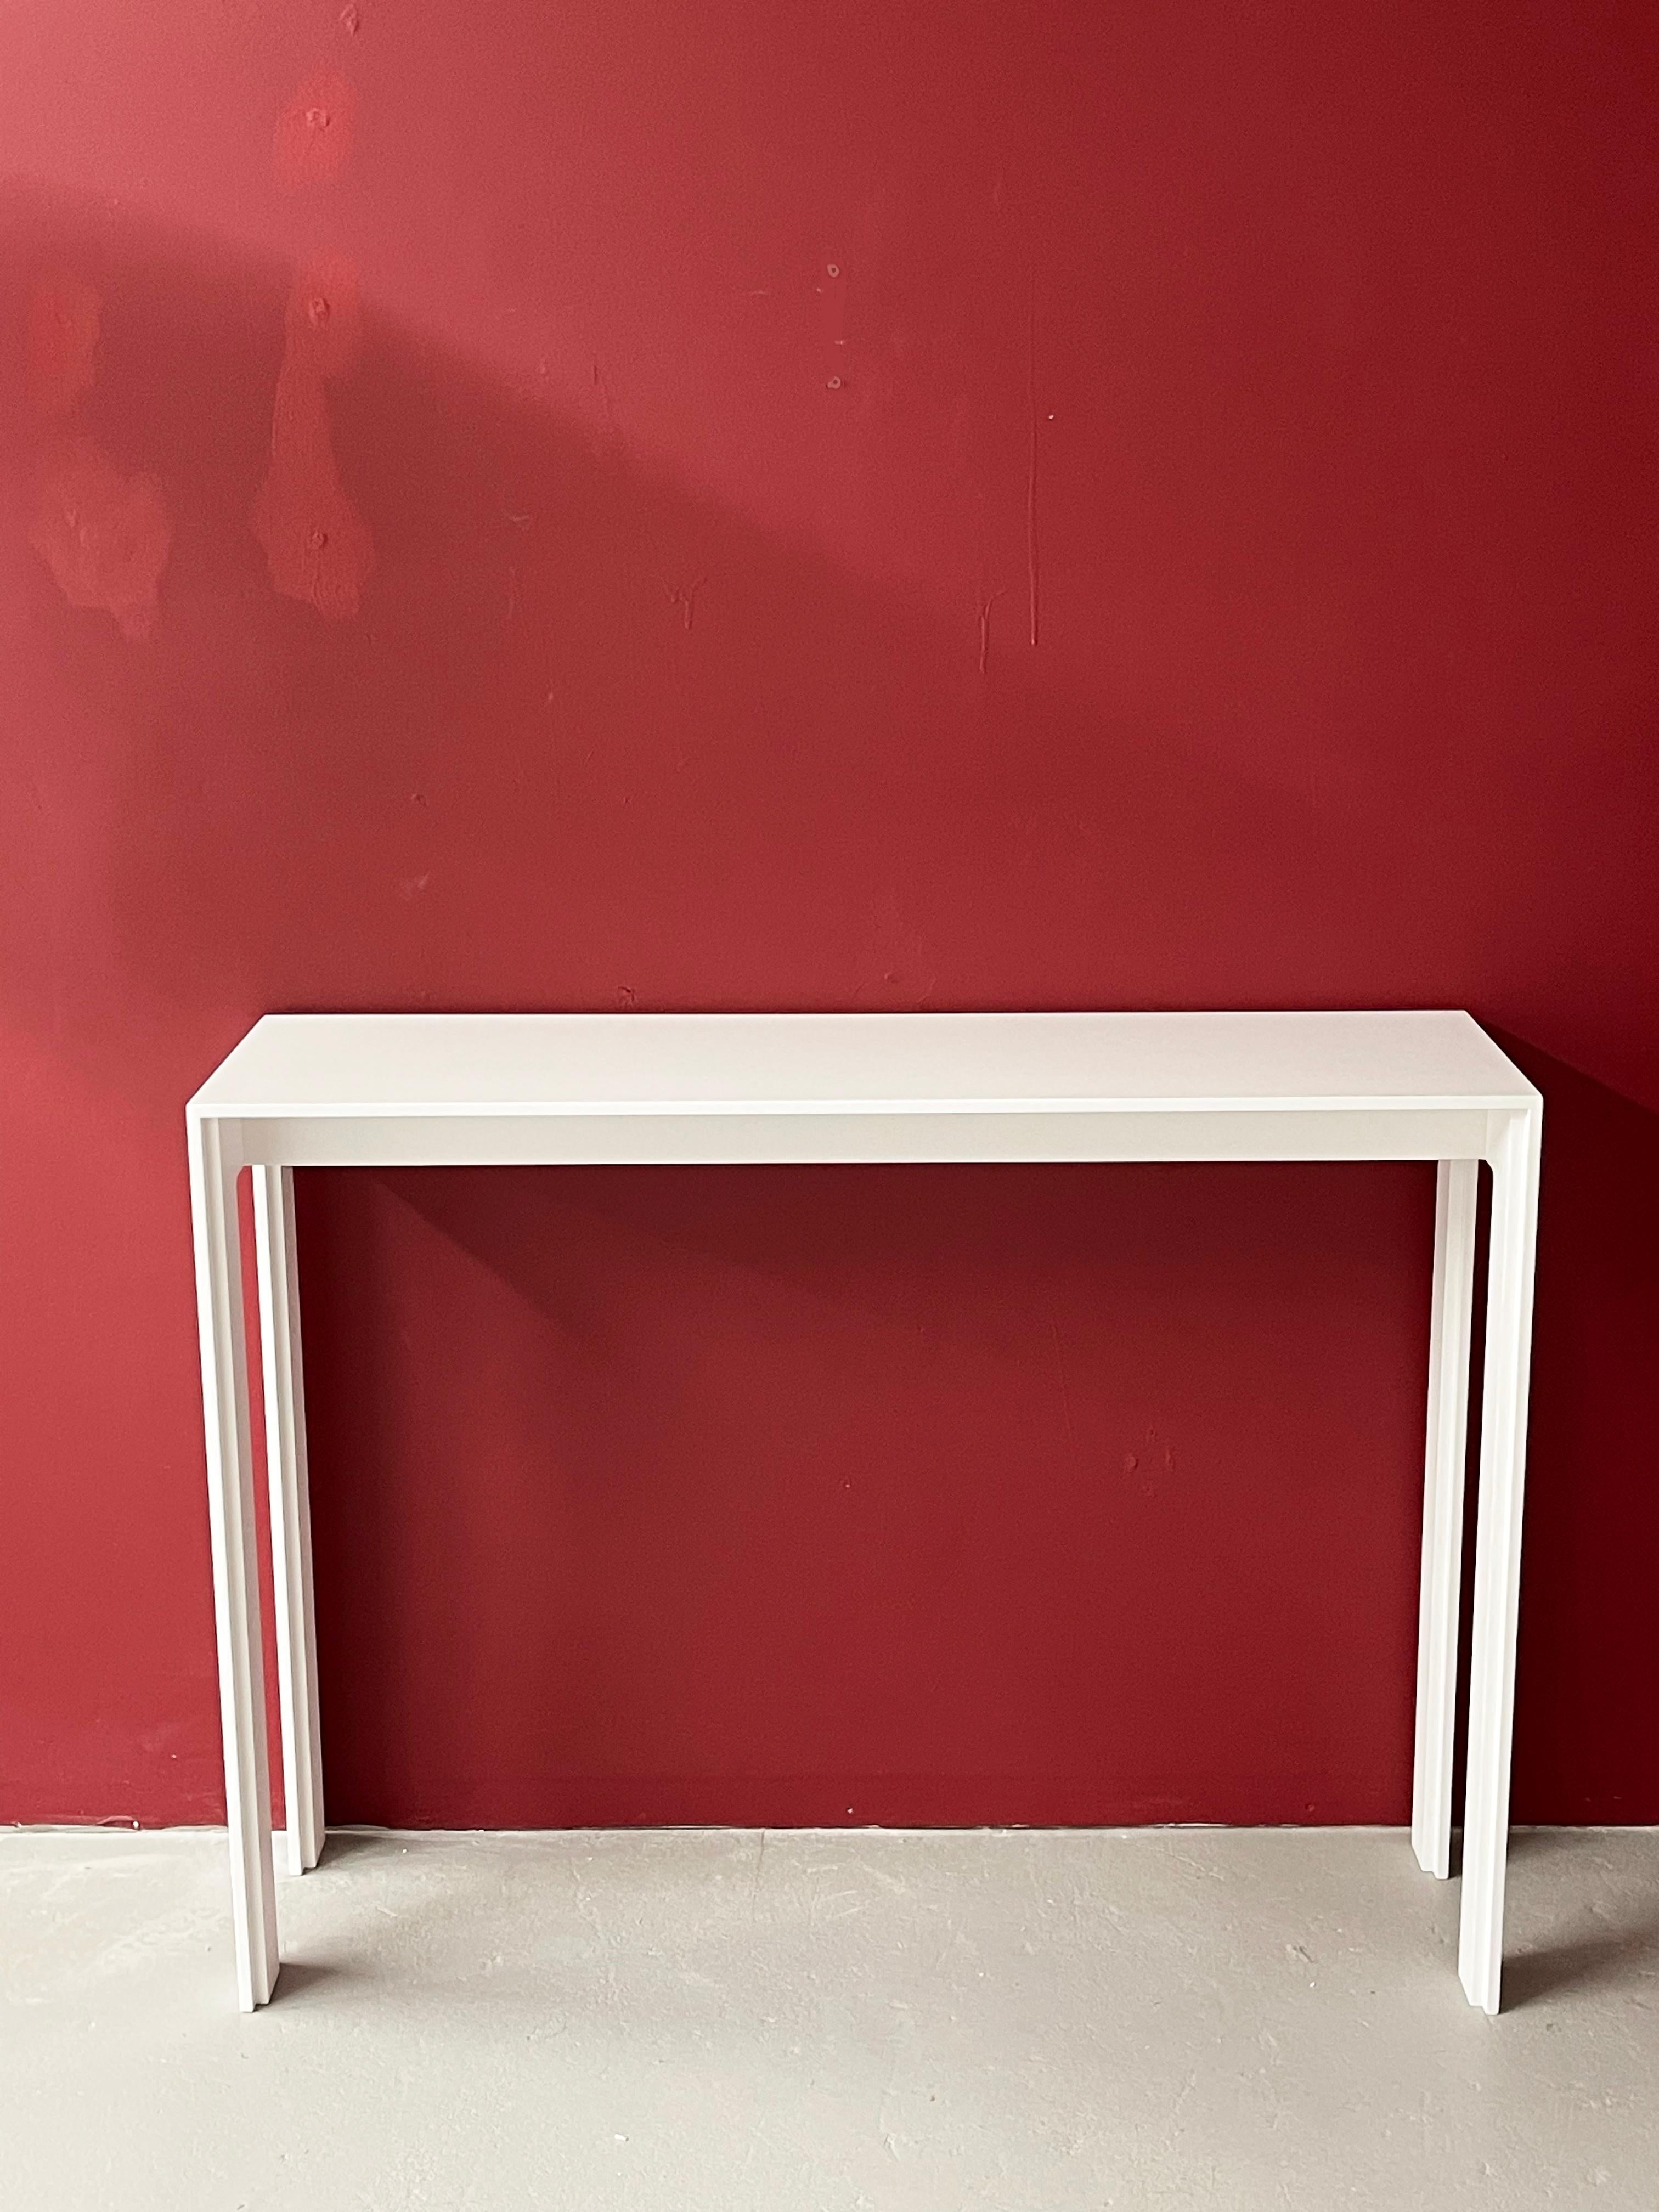 This elegant console combines subtle while elaborate design in a durable modern material.
The top and legs are designed with recessed edges, like a picture frame to encompass the void. The subtle front from contrasts with the side views featuring